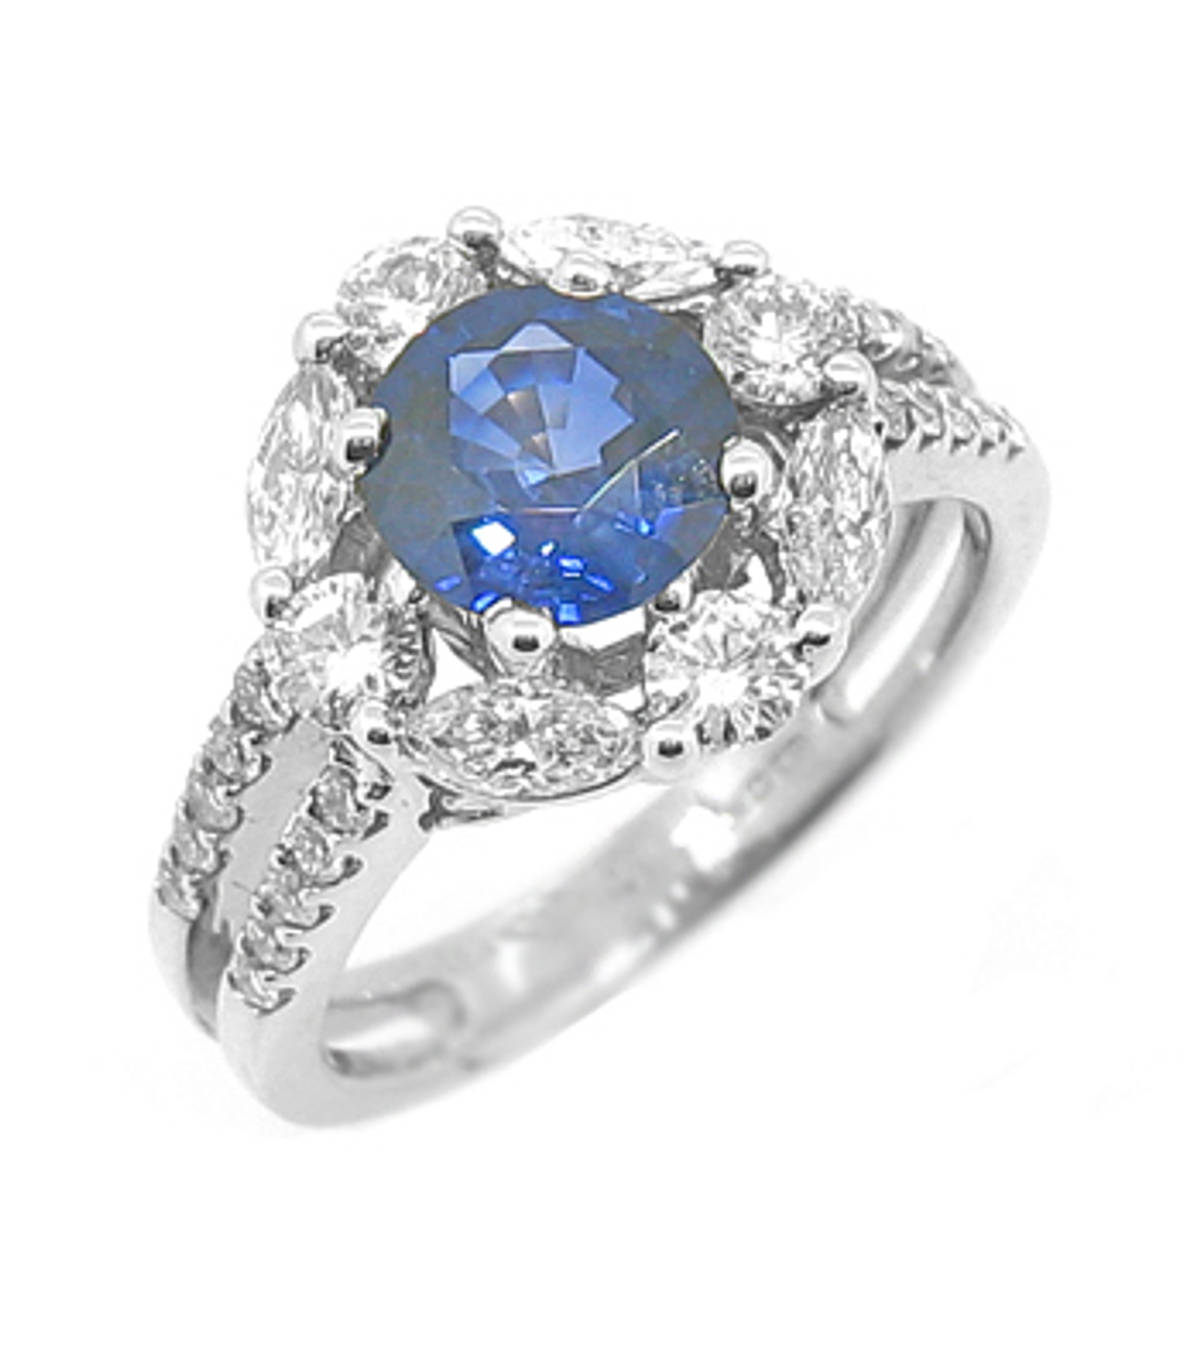 Sapphire and cluster ring with double row diamond shouldersPictured item: 1.55cts sapphire/0.96cts diamonds set in 18k white gold